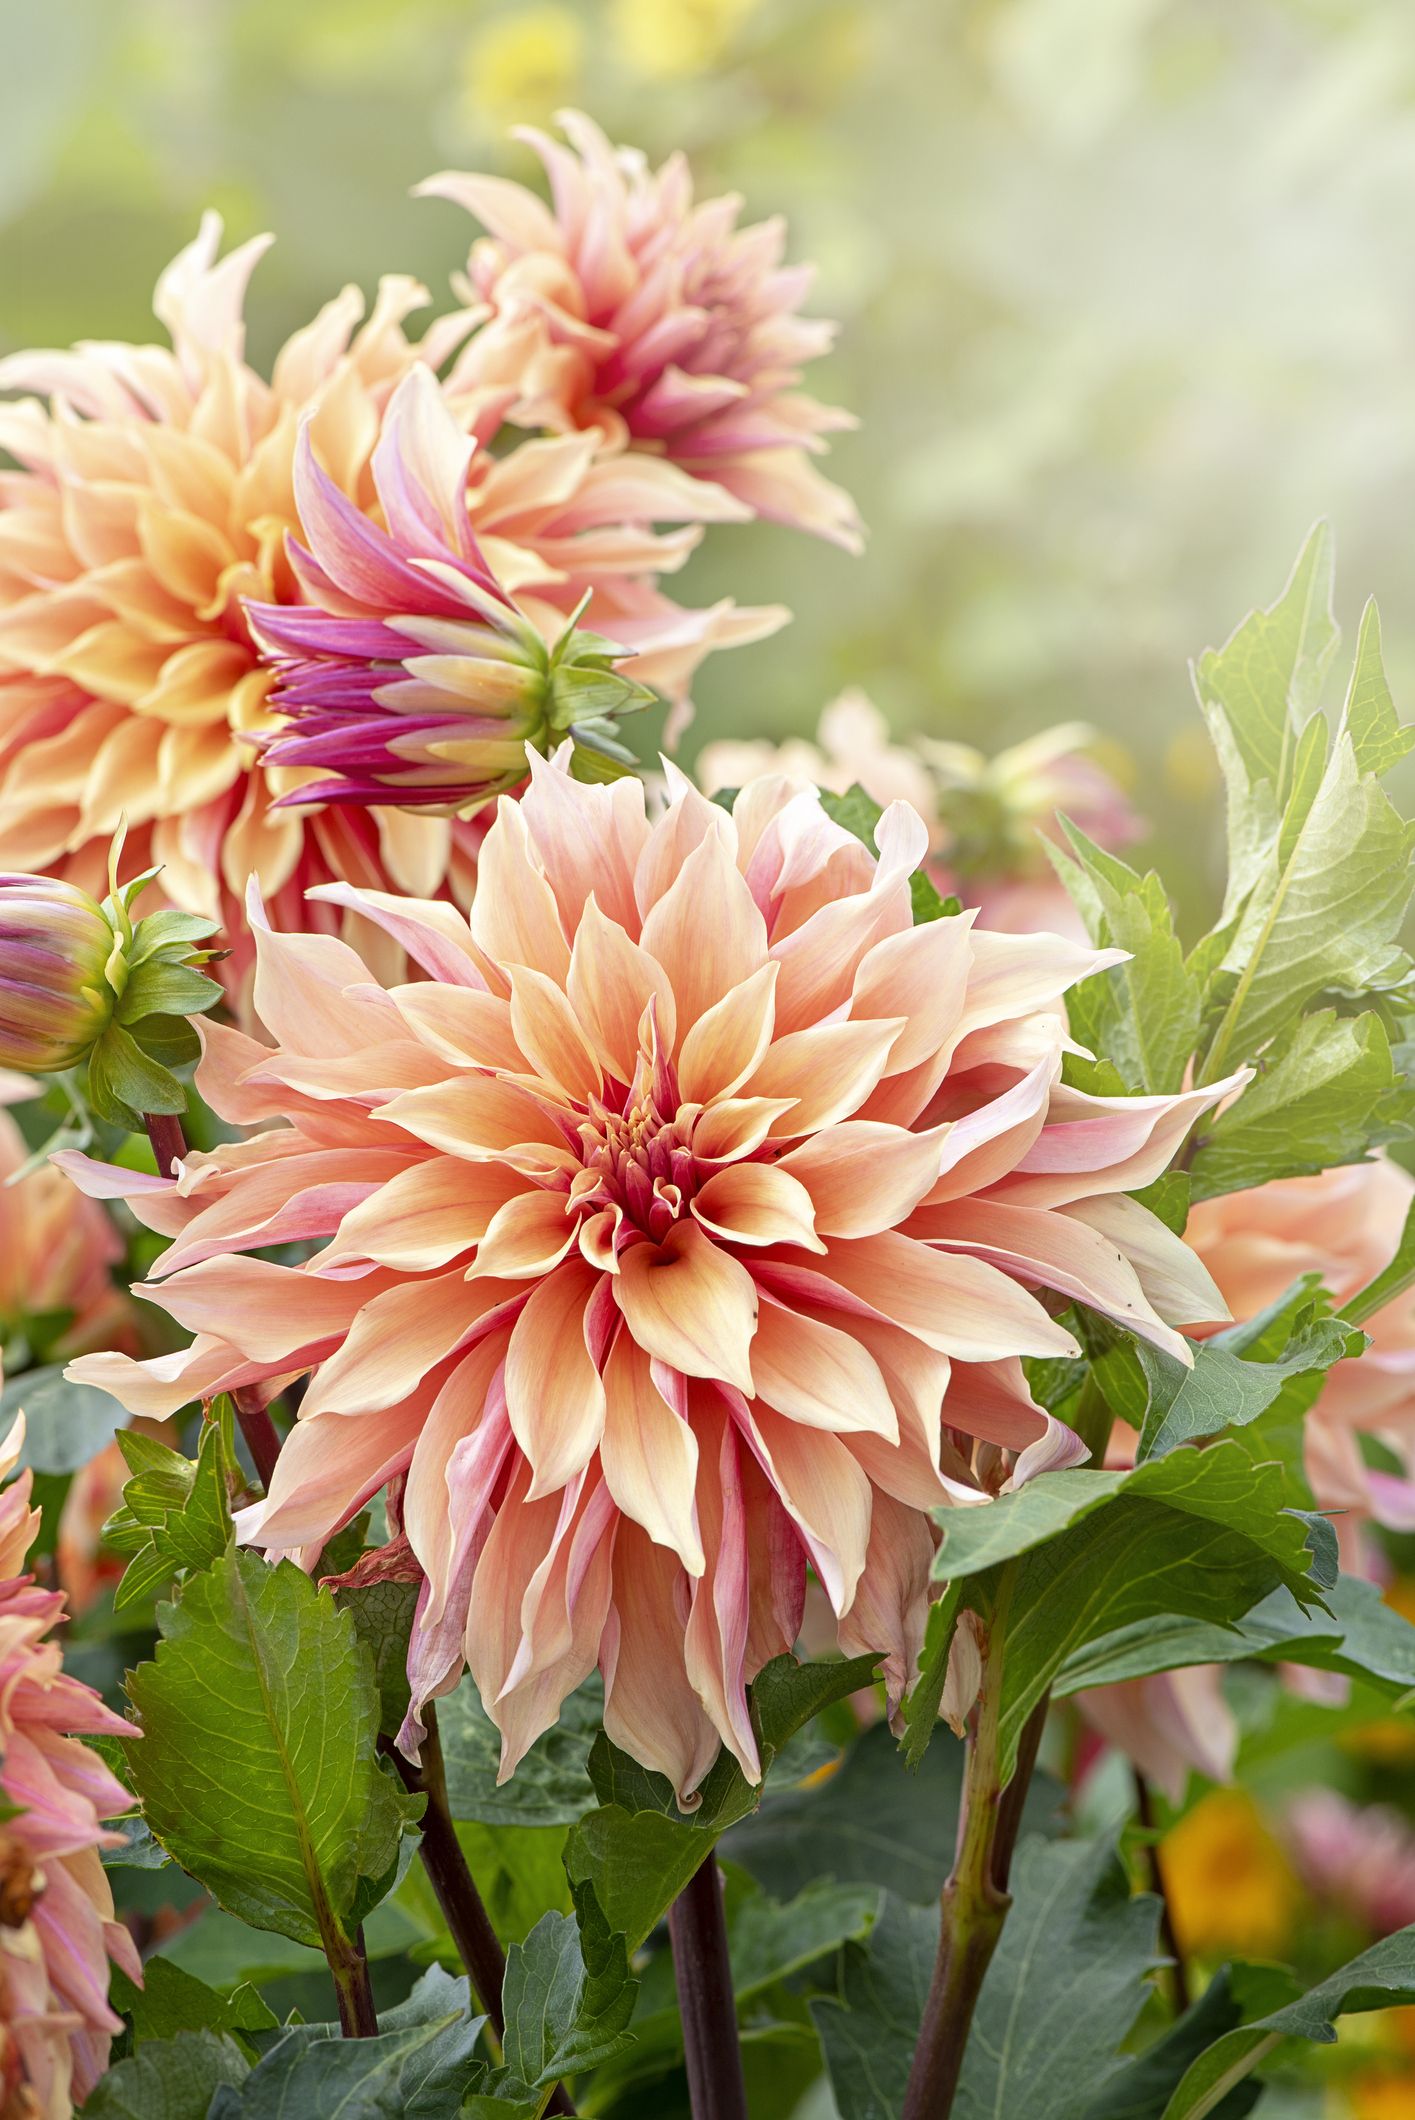 These 39 Flowers Have Astonishing Meanings